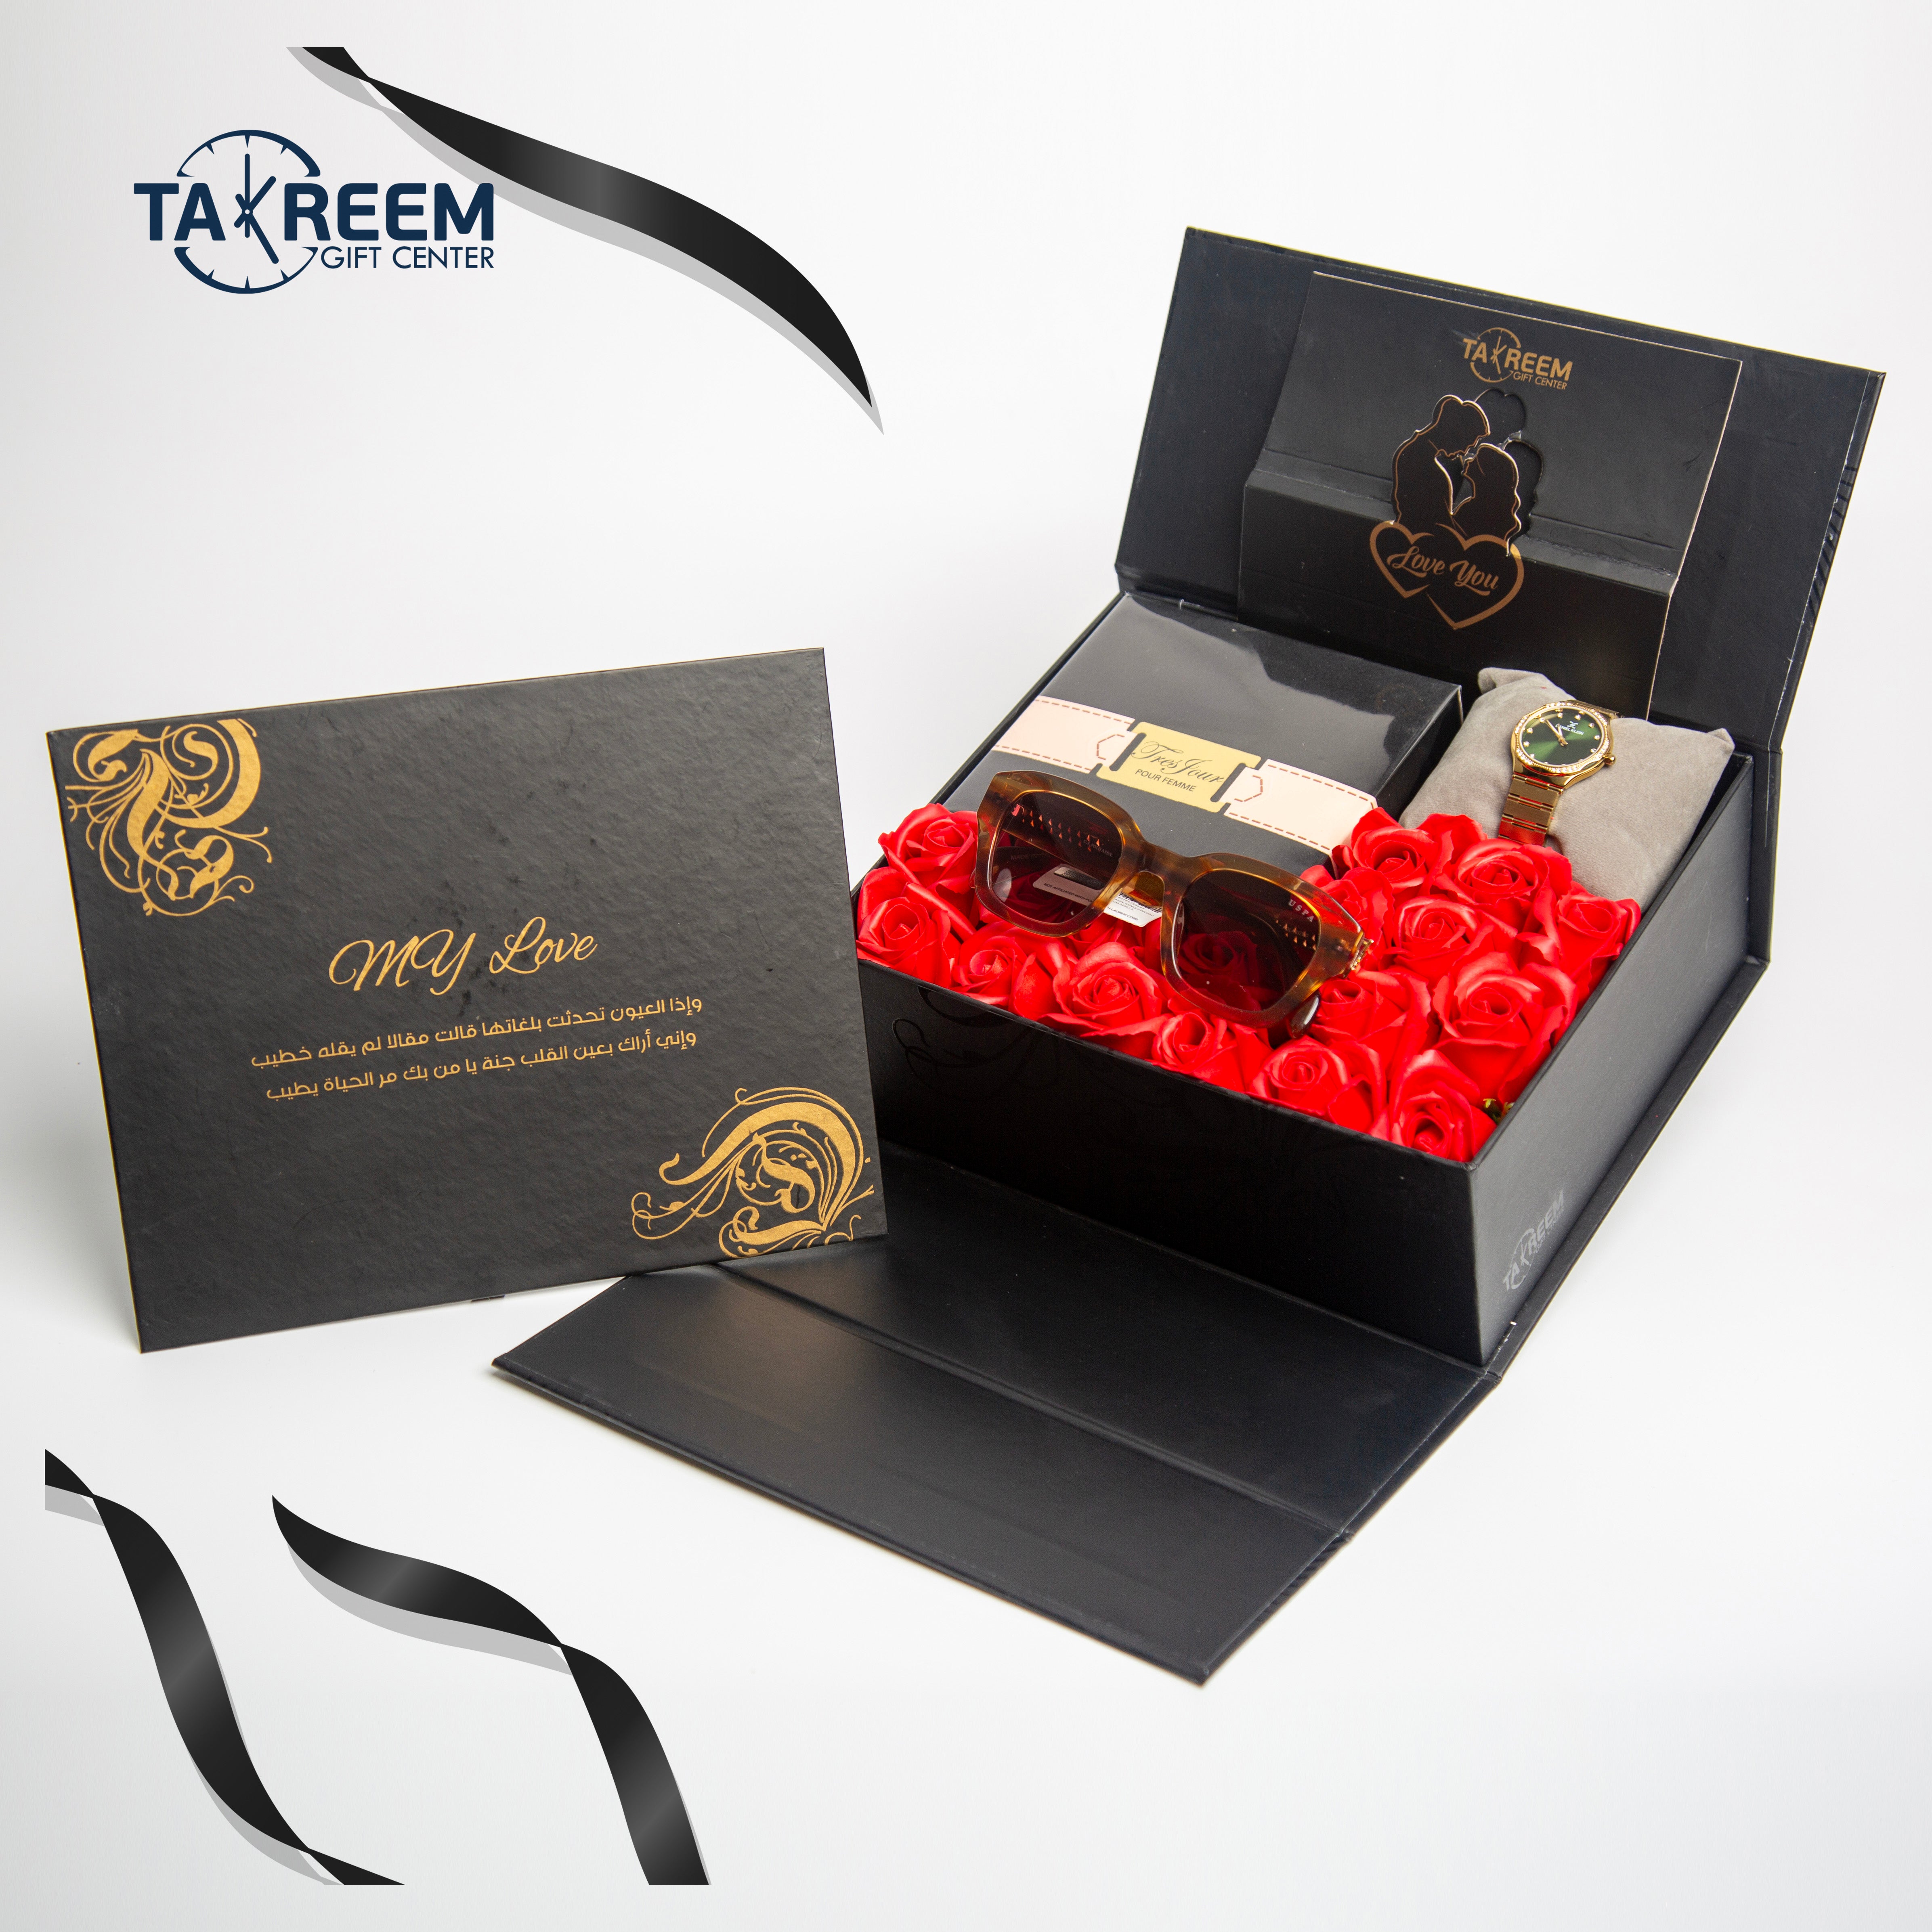 Big Gold3 Gift Boxes By Takreem Gifts Center